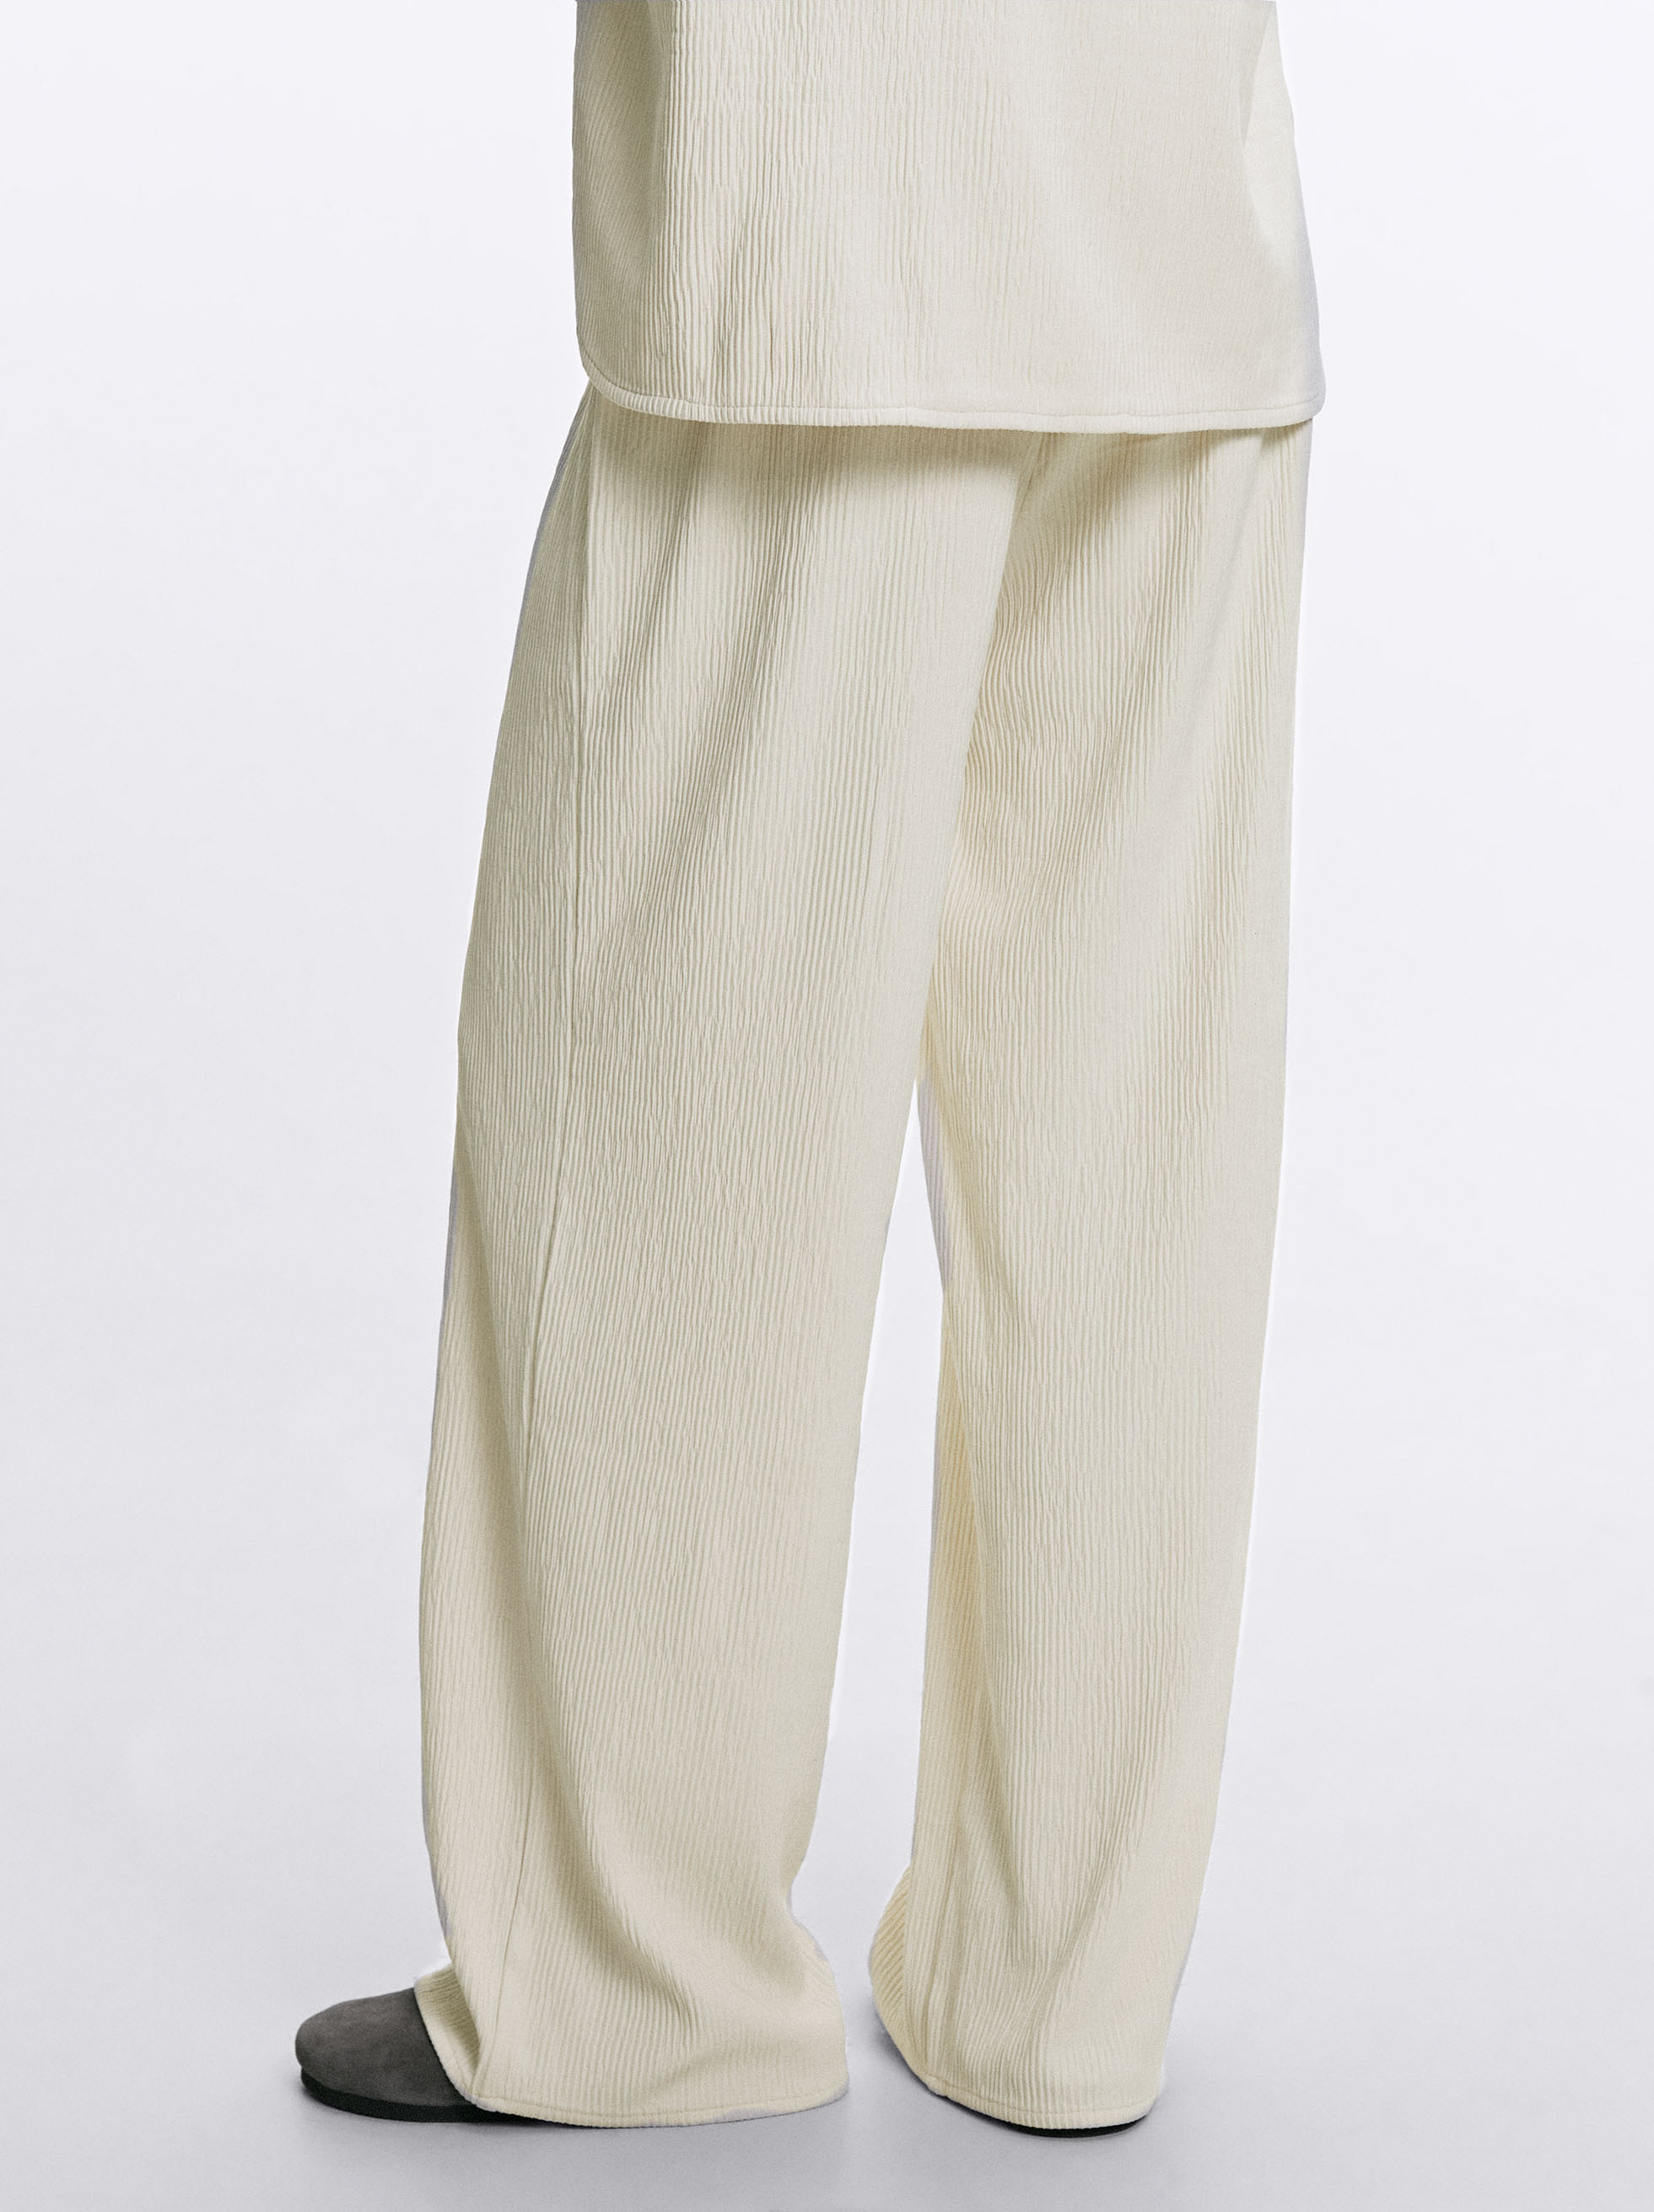 Loose-Fitting Trousers With Elastic Waistband image number 4.0